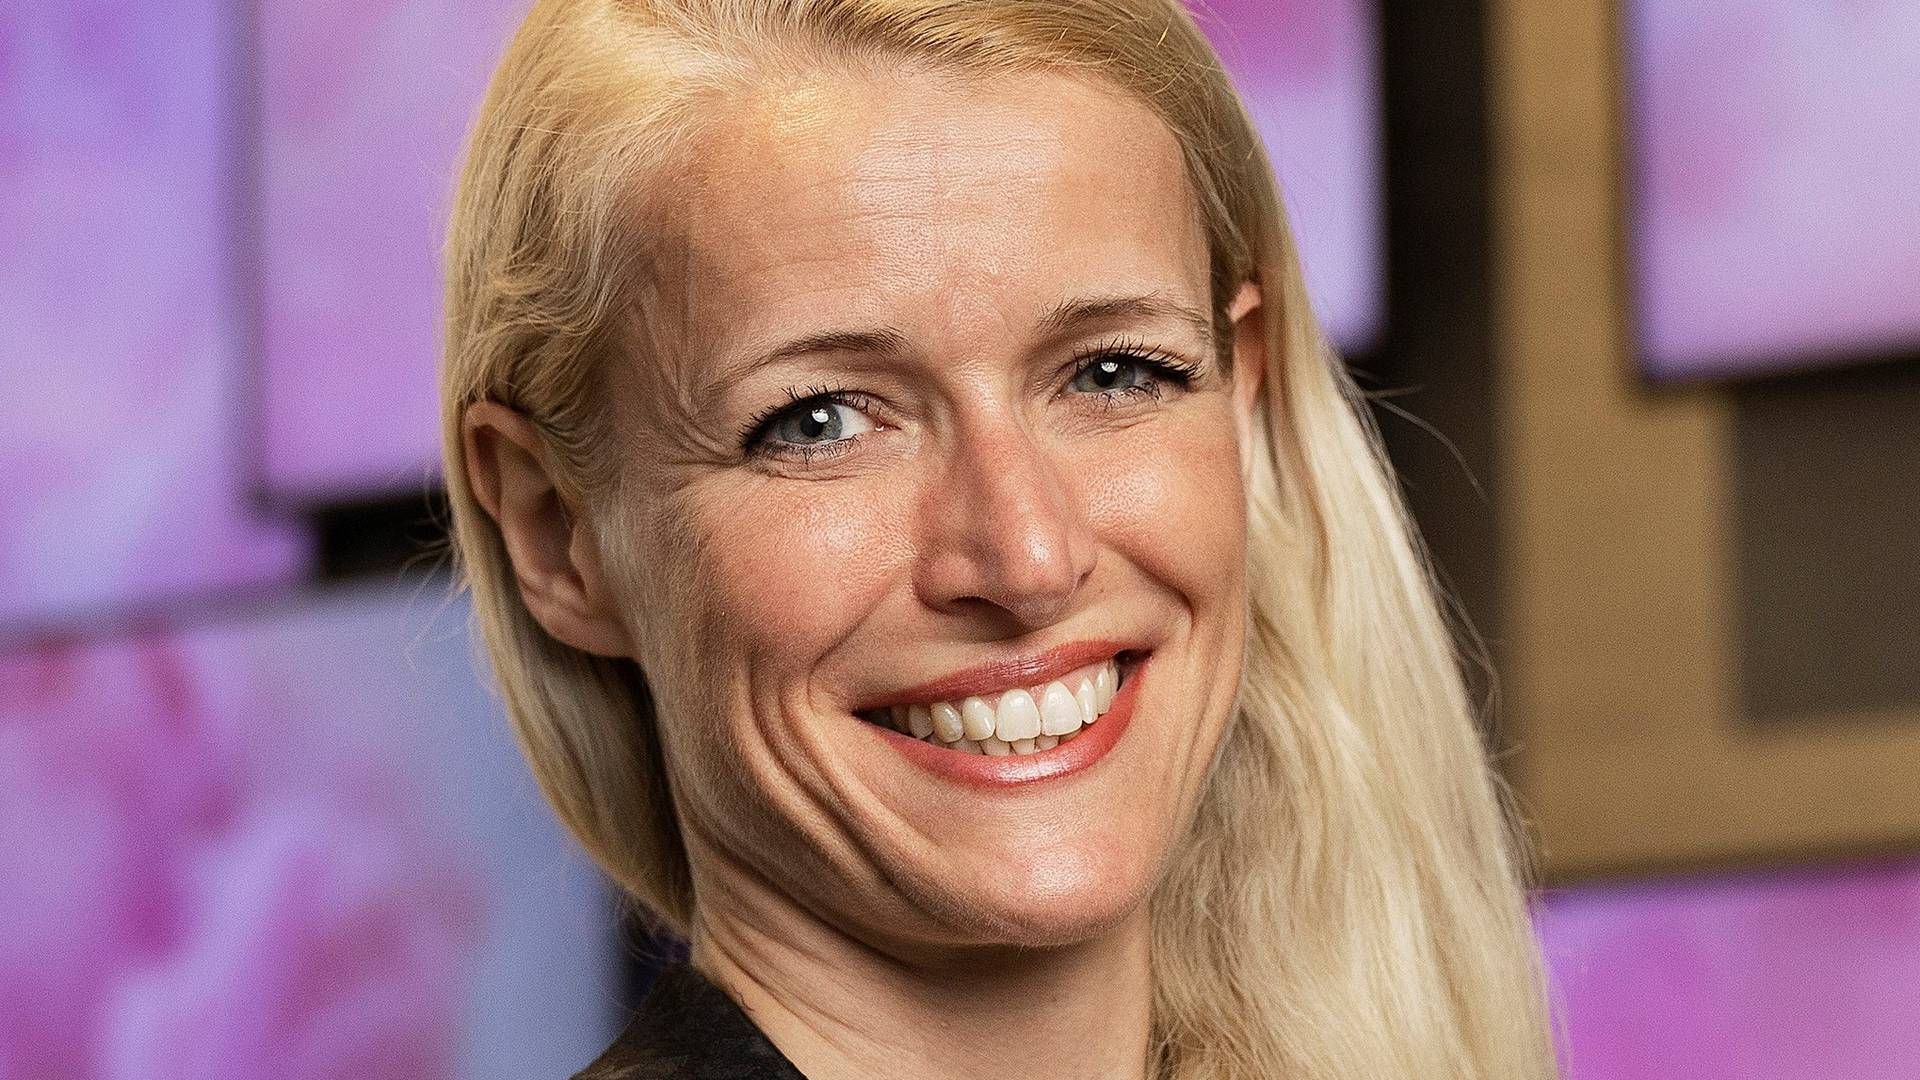 Kristina Øgaard is the new head of Responsible Investments at Nykredit. | Photo: Accenture/pr